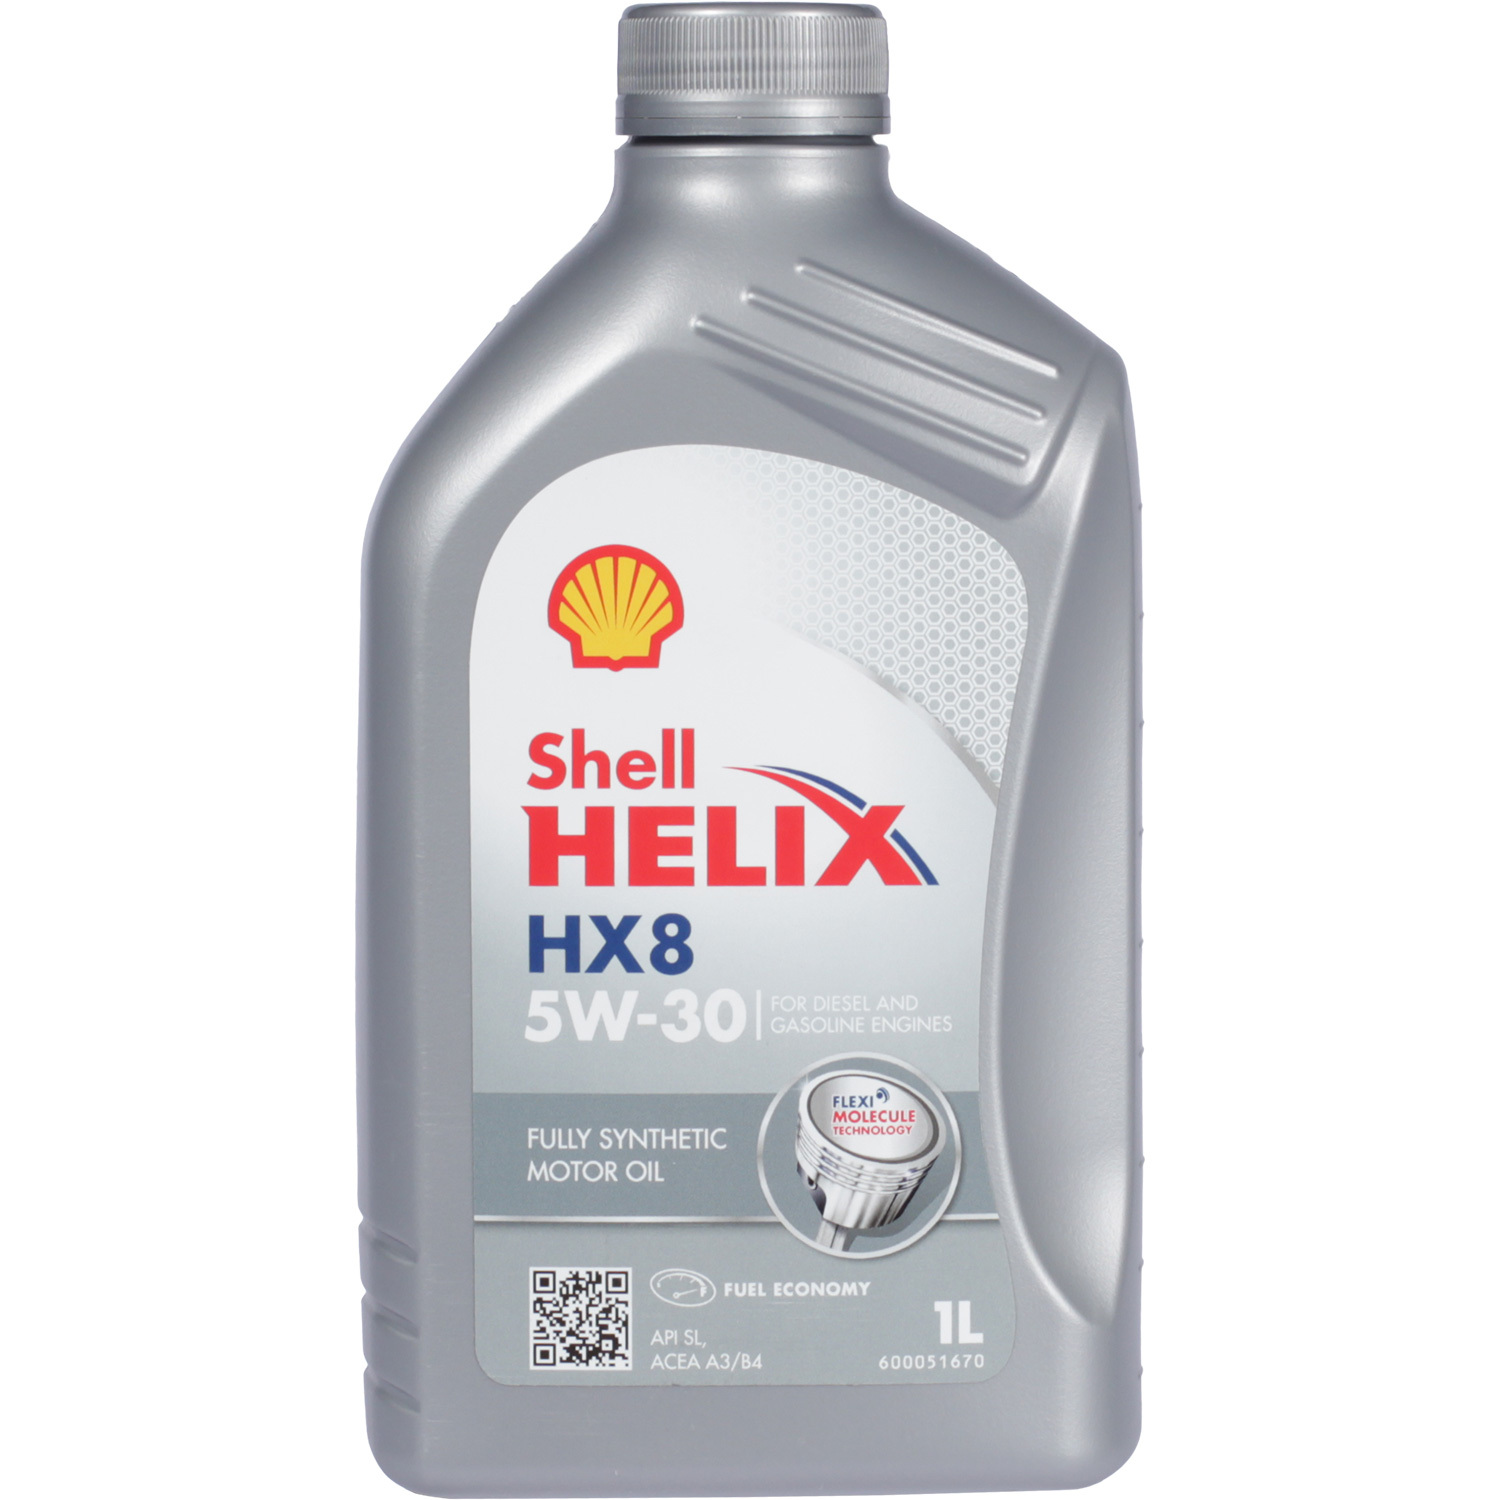 Shell Моторное масло Shell Helix HX8 5W-30, 1 л масло моторное shell helix ultra 5w 30 1 л